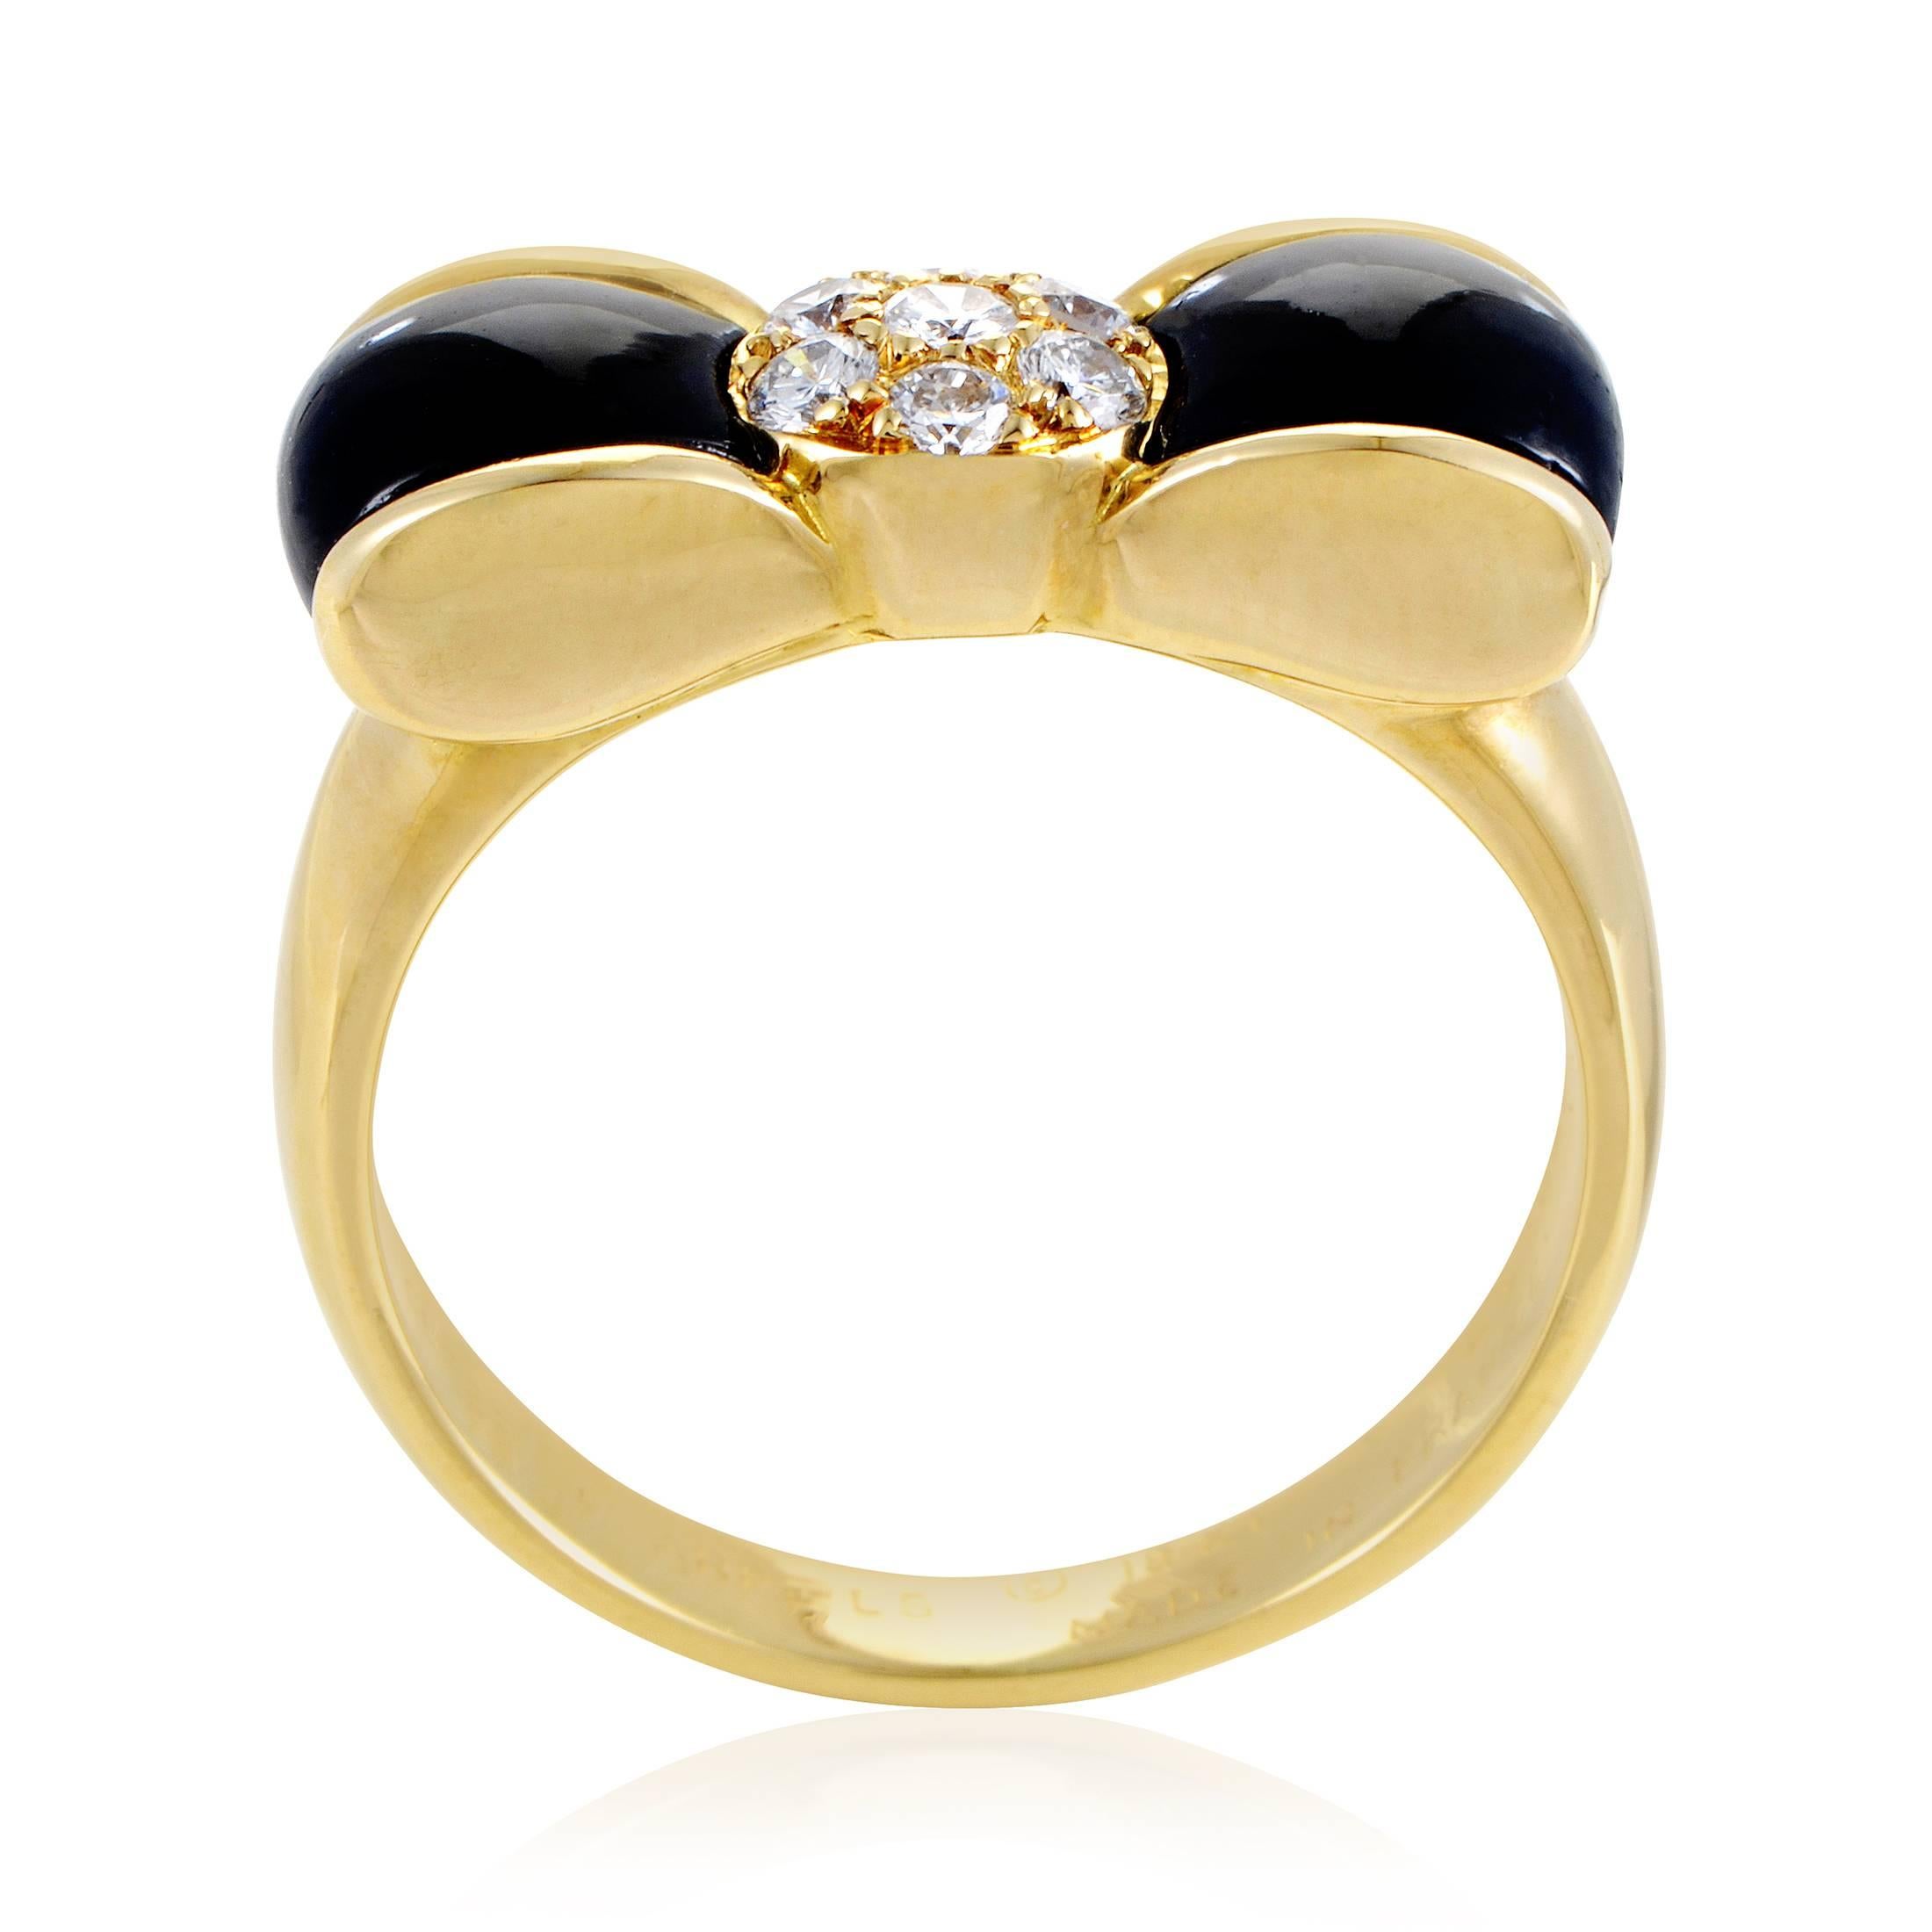 The wonderful shape of a bow tie is graced with eye-catching contrast in this remarkable ring from Van Cleef & Arpels made of immaculate 18K yellow gold and embellished with resplendent diamonds amounting to 0.12ct as well as stunning onyx stone for